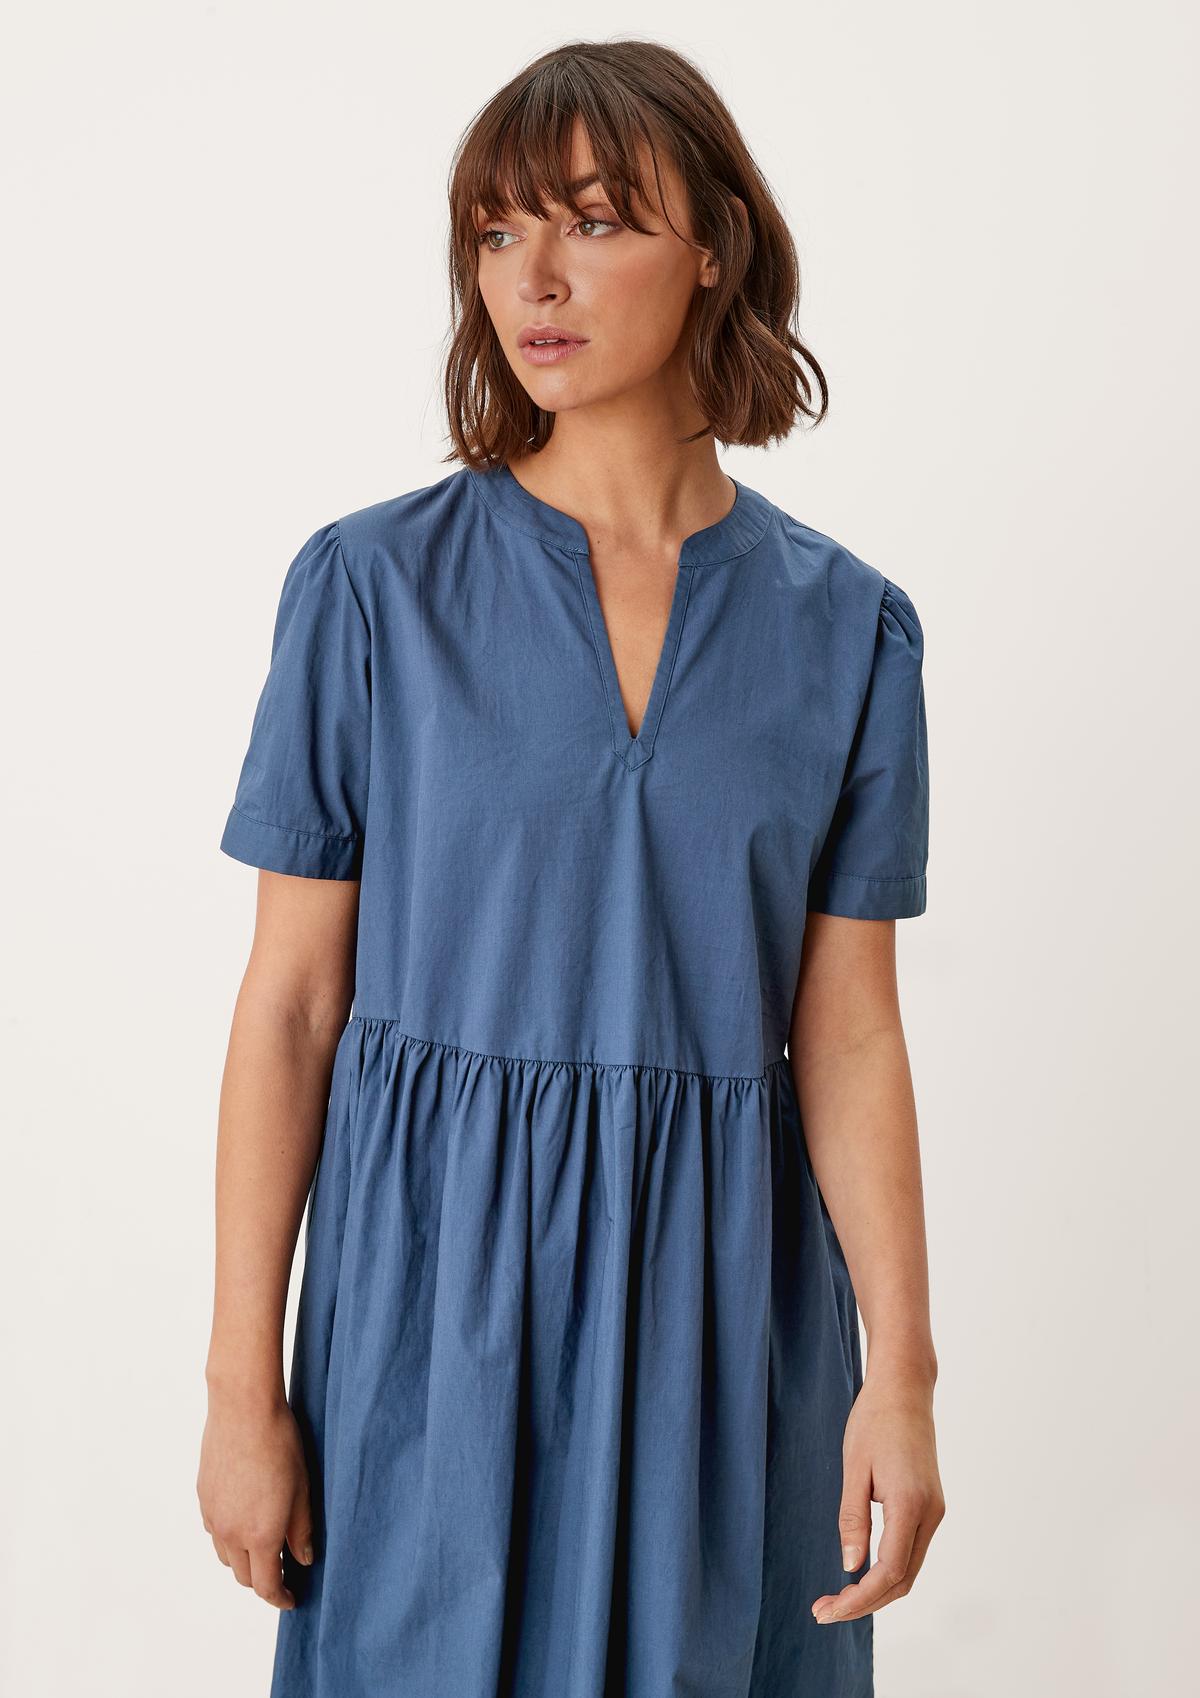 s.Oliver Shirt dress with a flared skirt